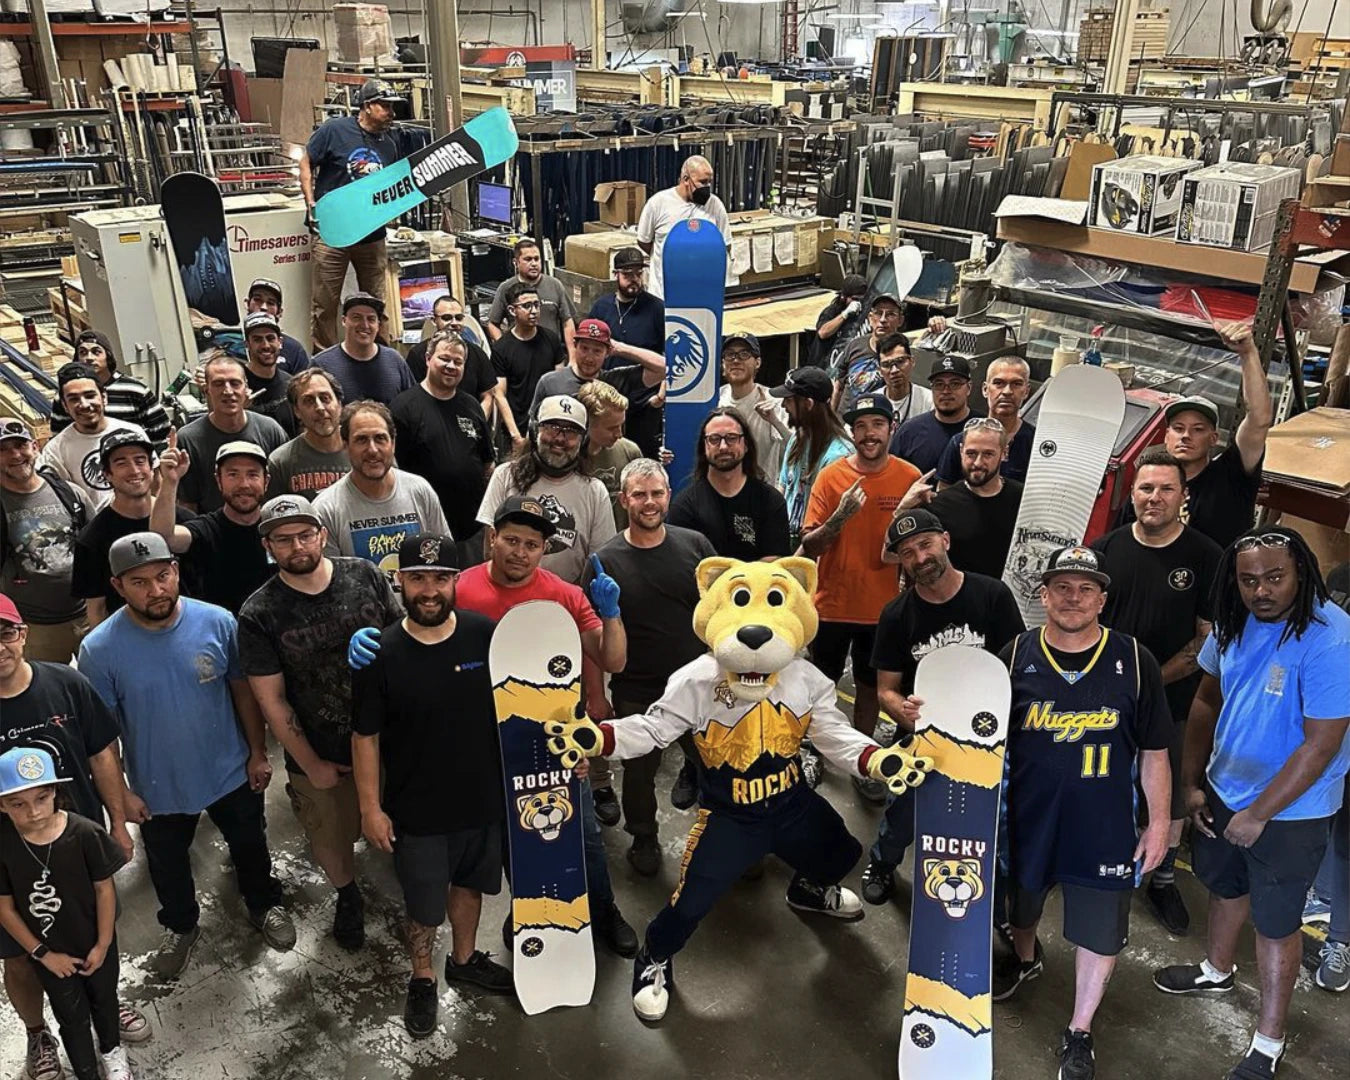 Tour The Never Summer Snowboards Factory in Denver, CO